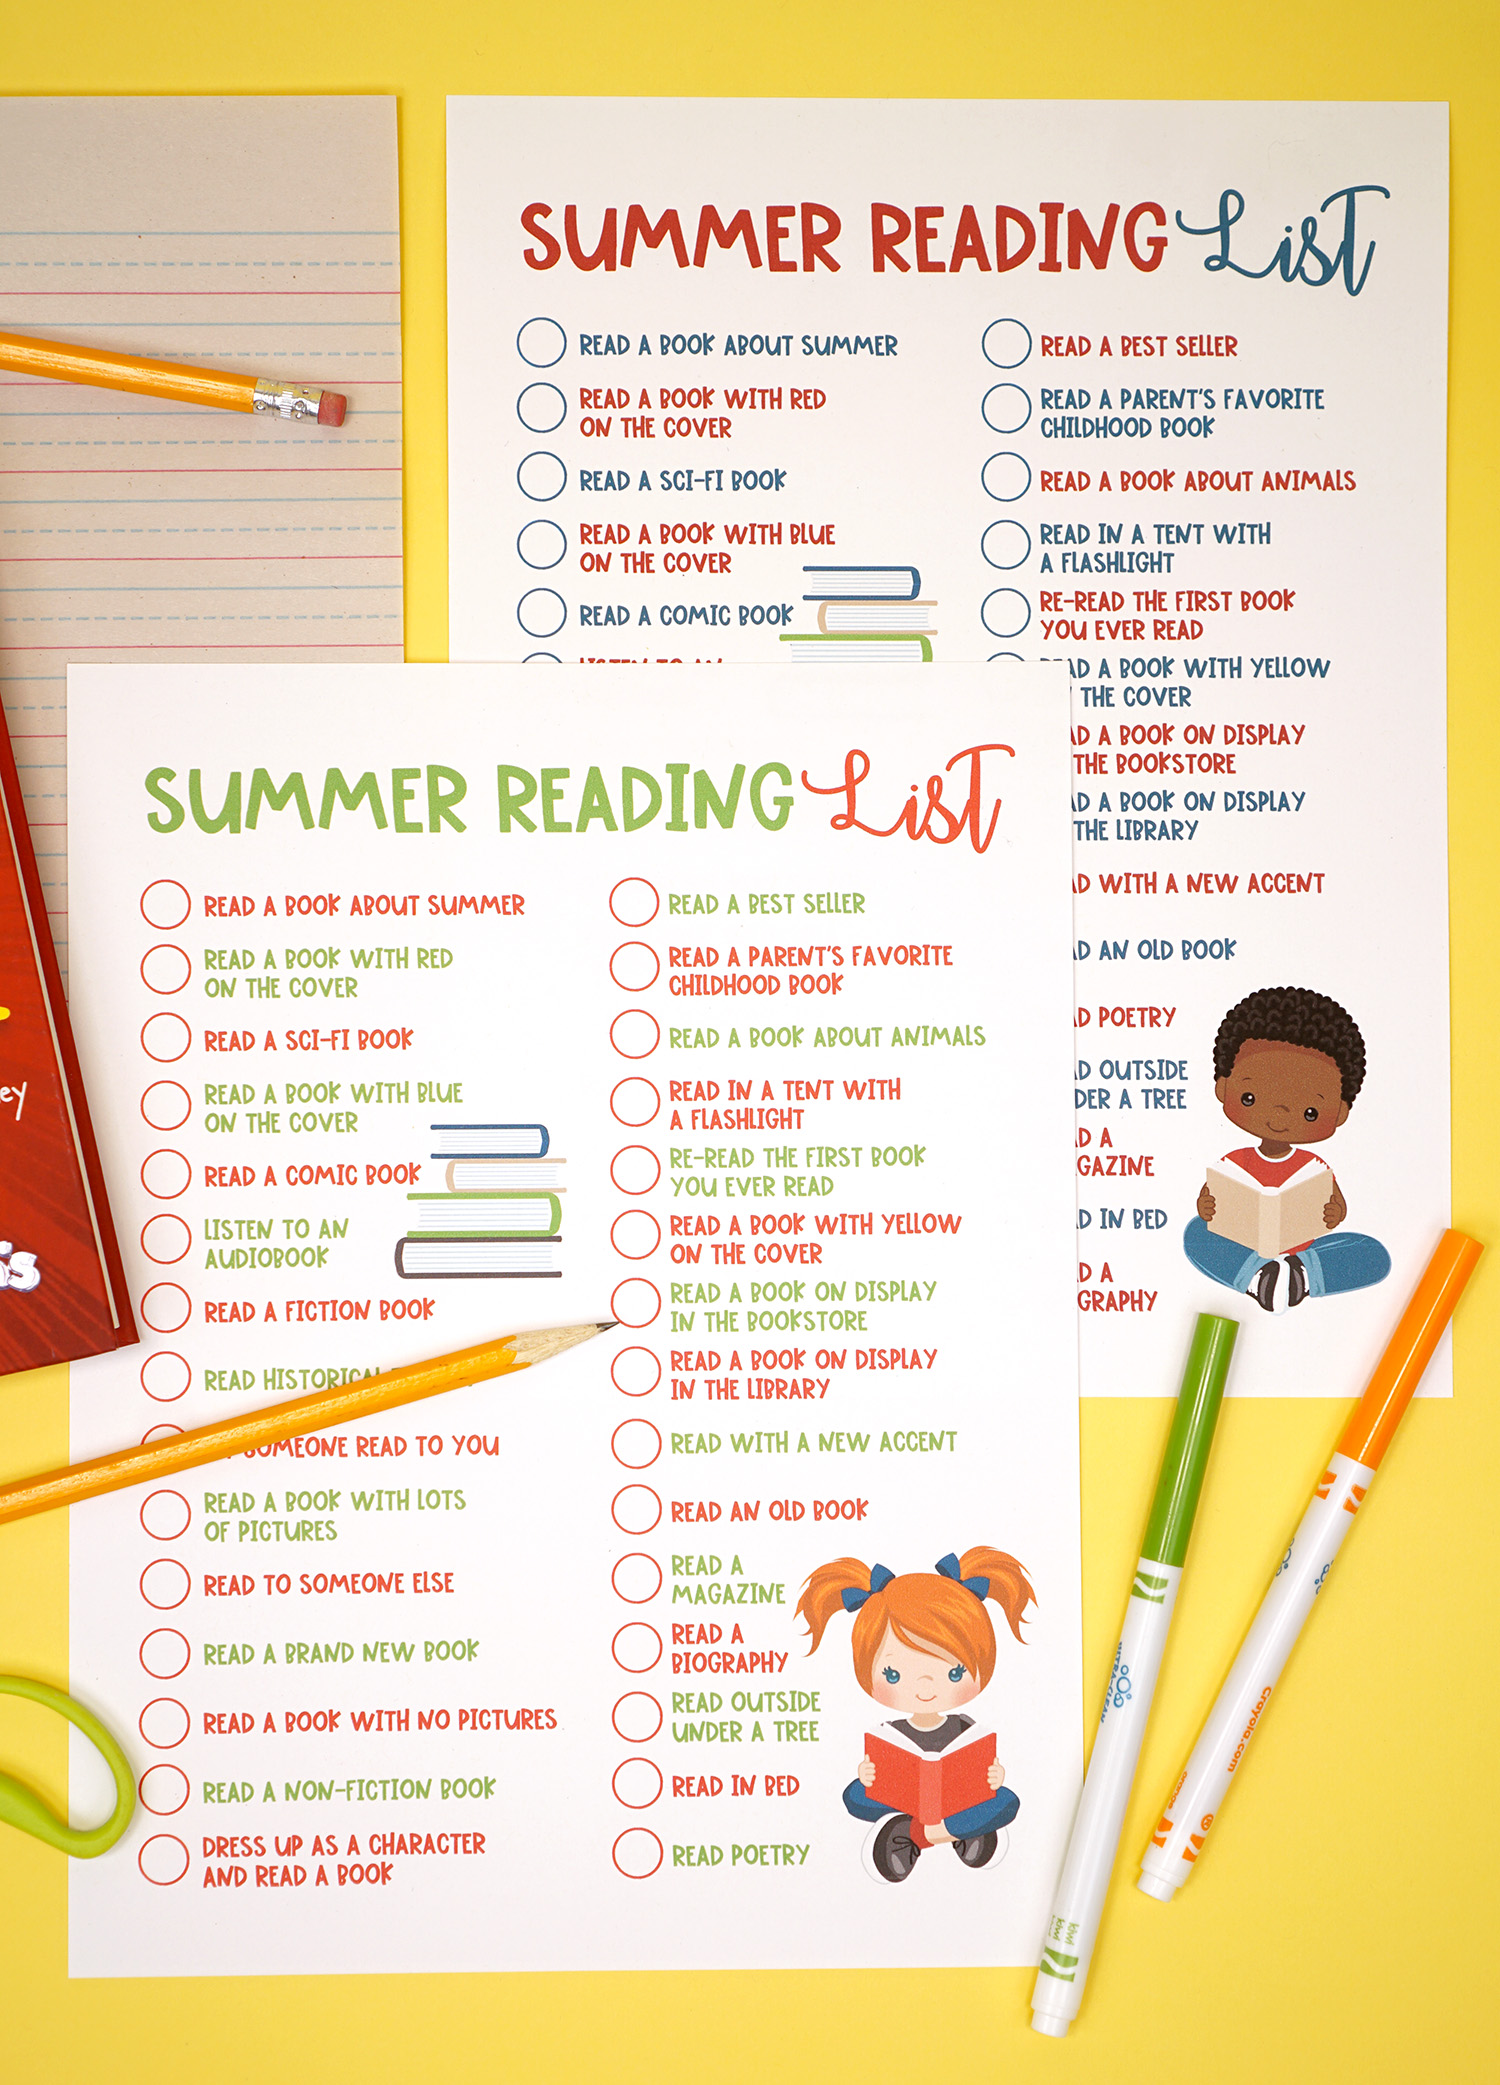 Summer Reading List For a 7-Year-Old